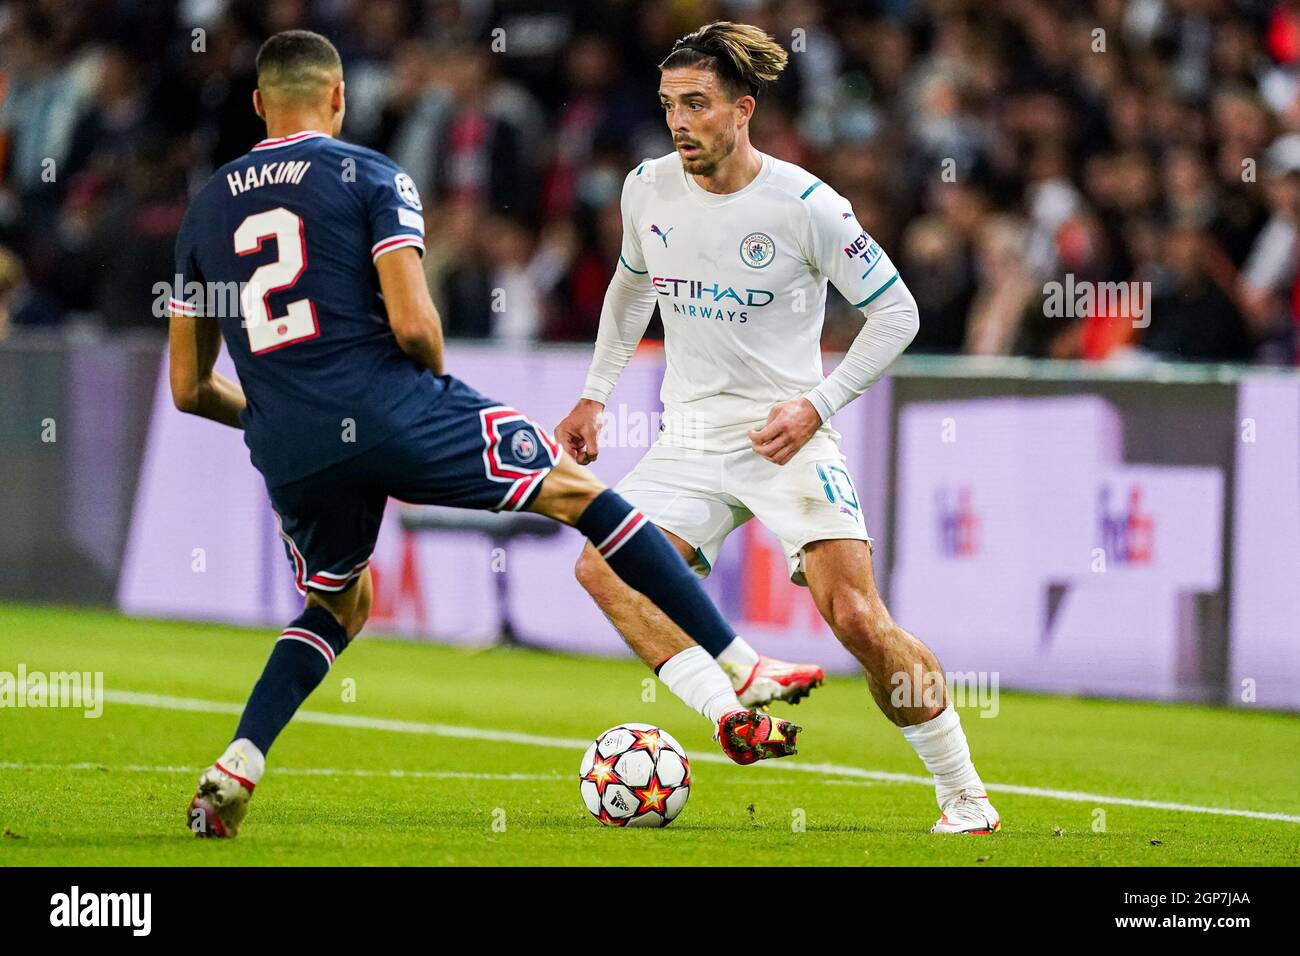 Vuil Rennen betaling PARIS, FRANCE - SEPTEMBER 28: Achraf Hakimi of Paris Saint-Germain and Jack  Grealish of Manchester City FC during the Champions League match between Paris  Saint-Germain and Manchester City FC at Parc des